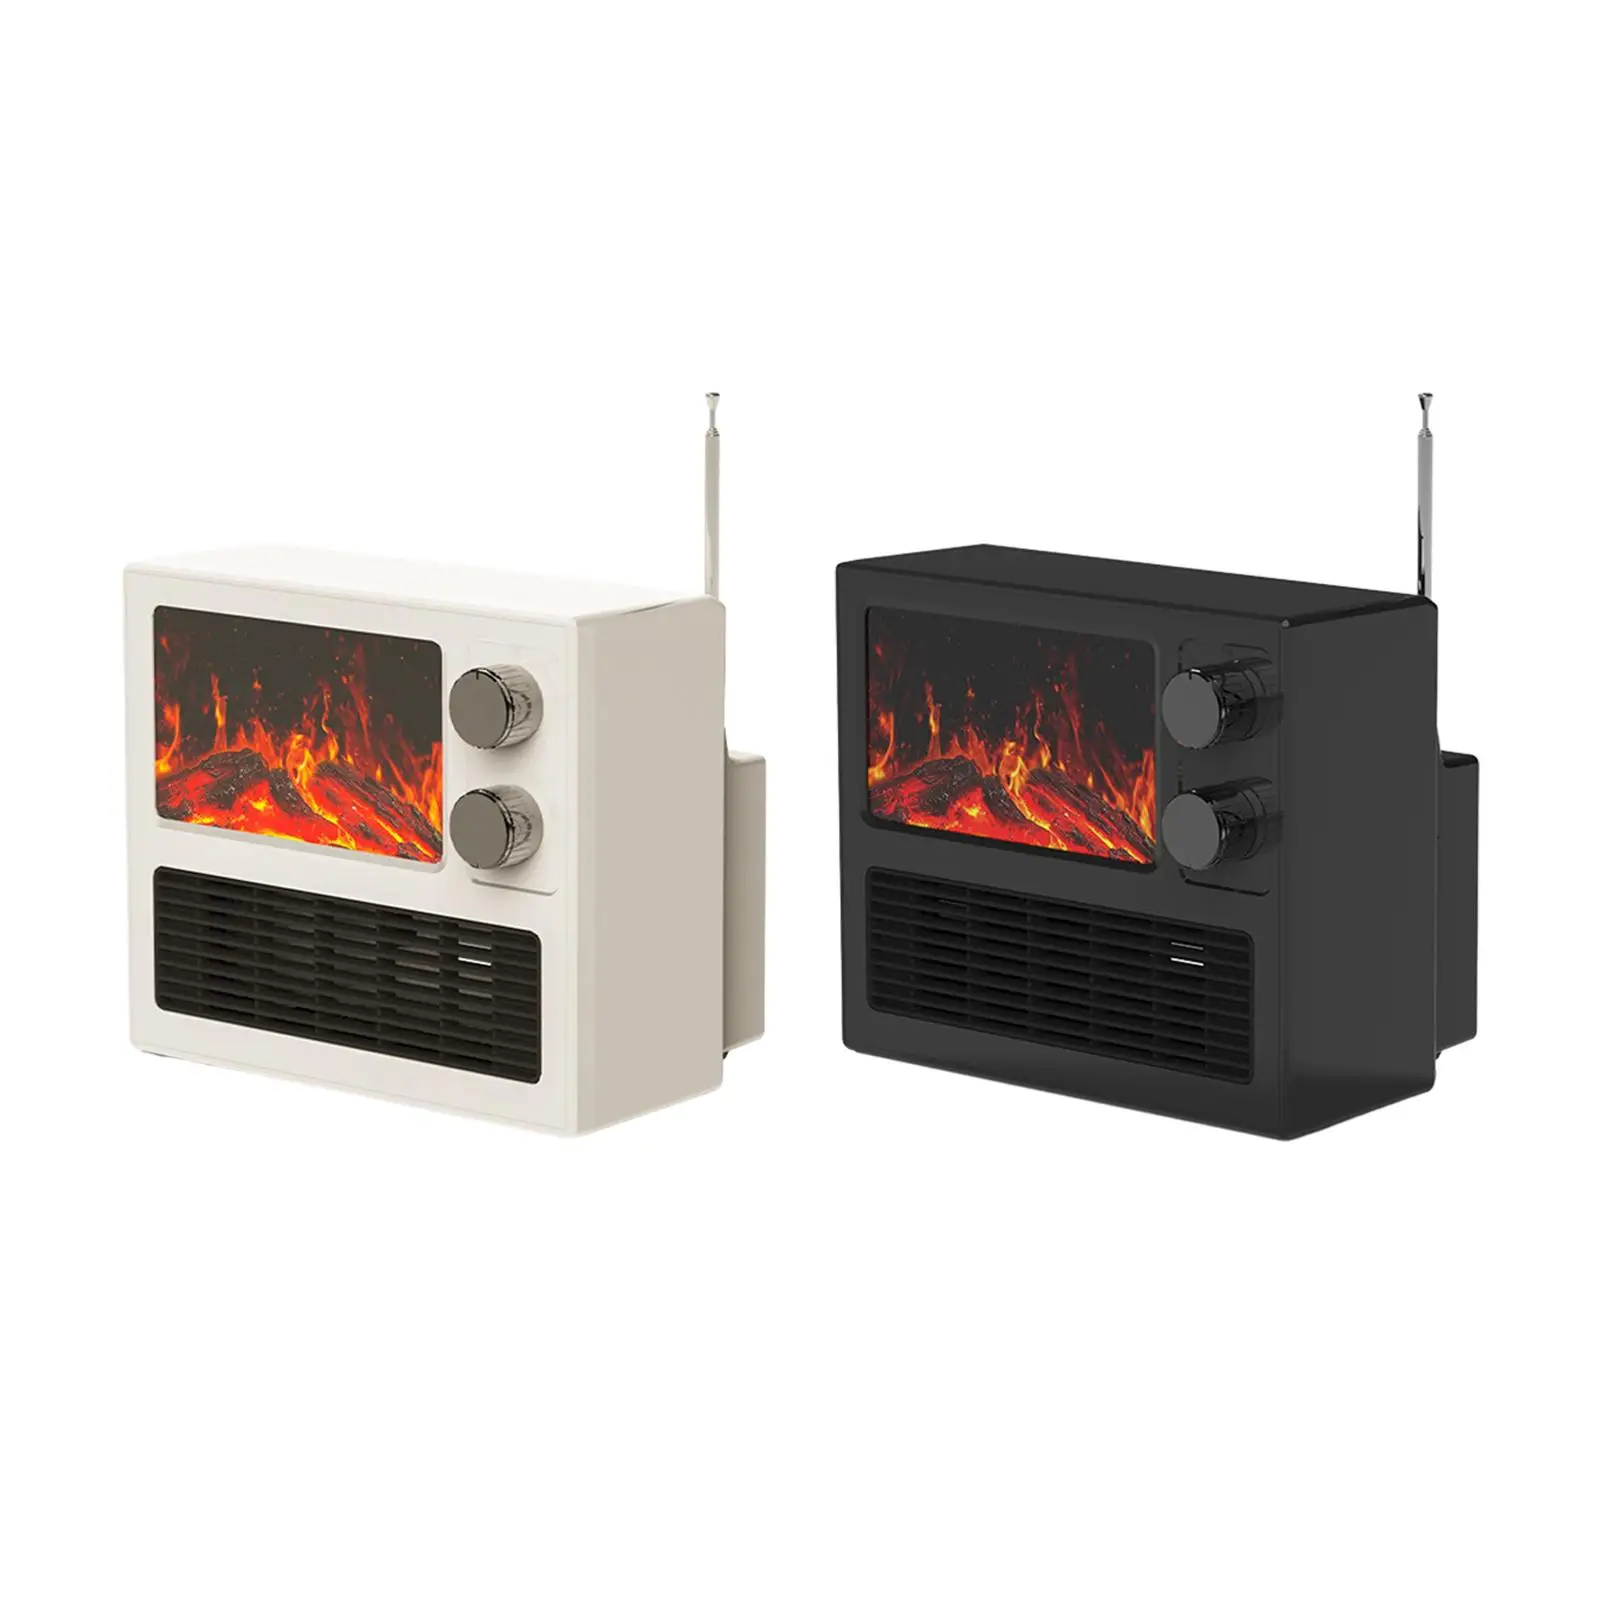 Electric Fireplace Freestanding Portable Low Noise Space Heater Room Heater for Home Dormitory Living Room